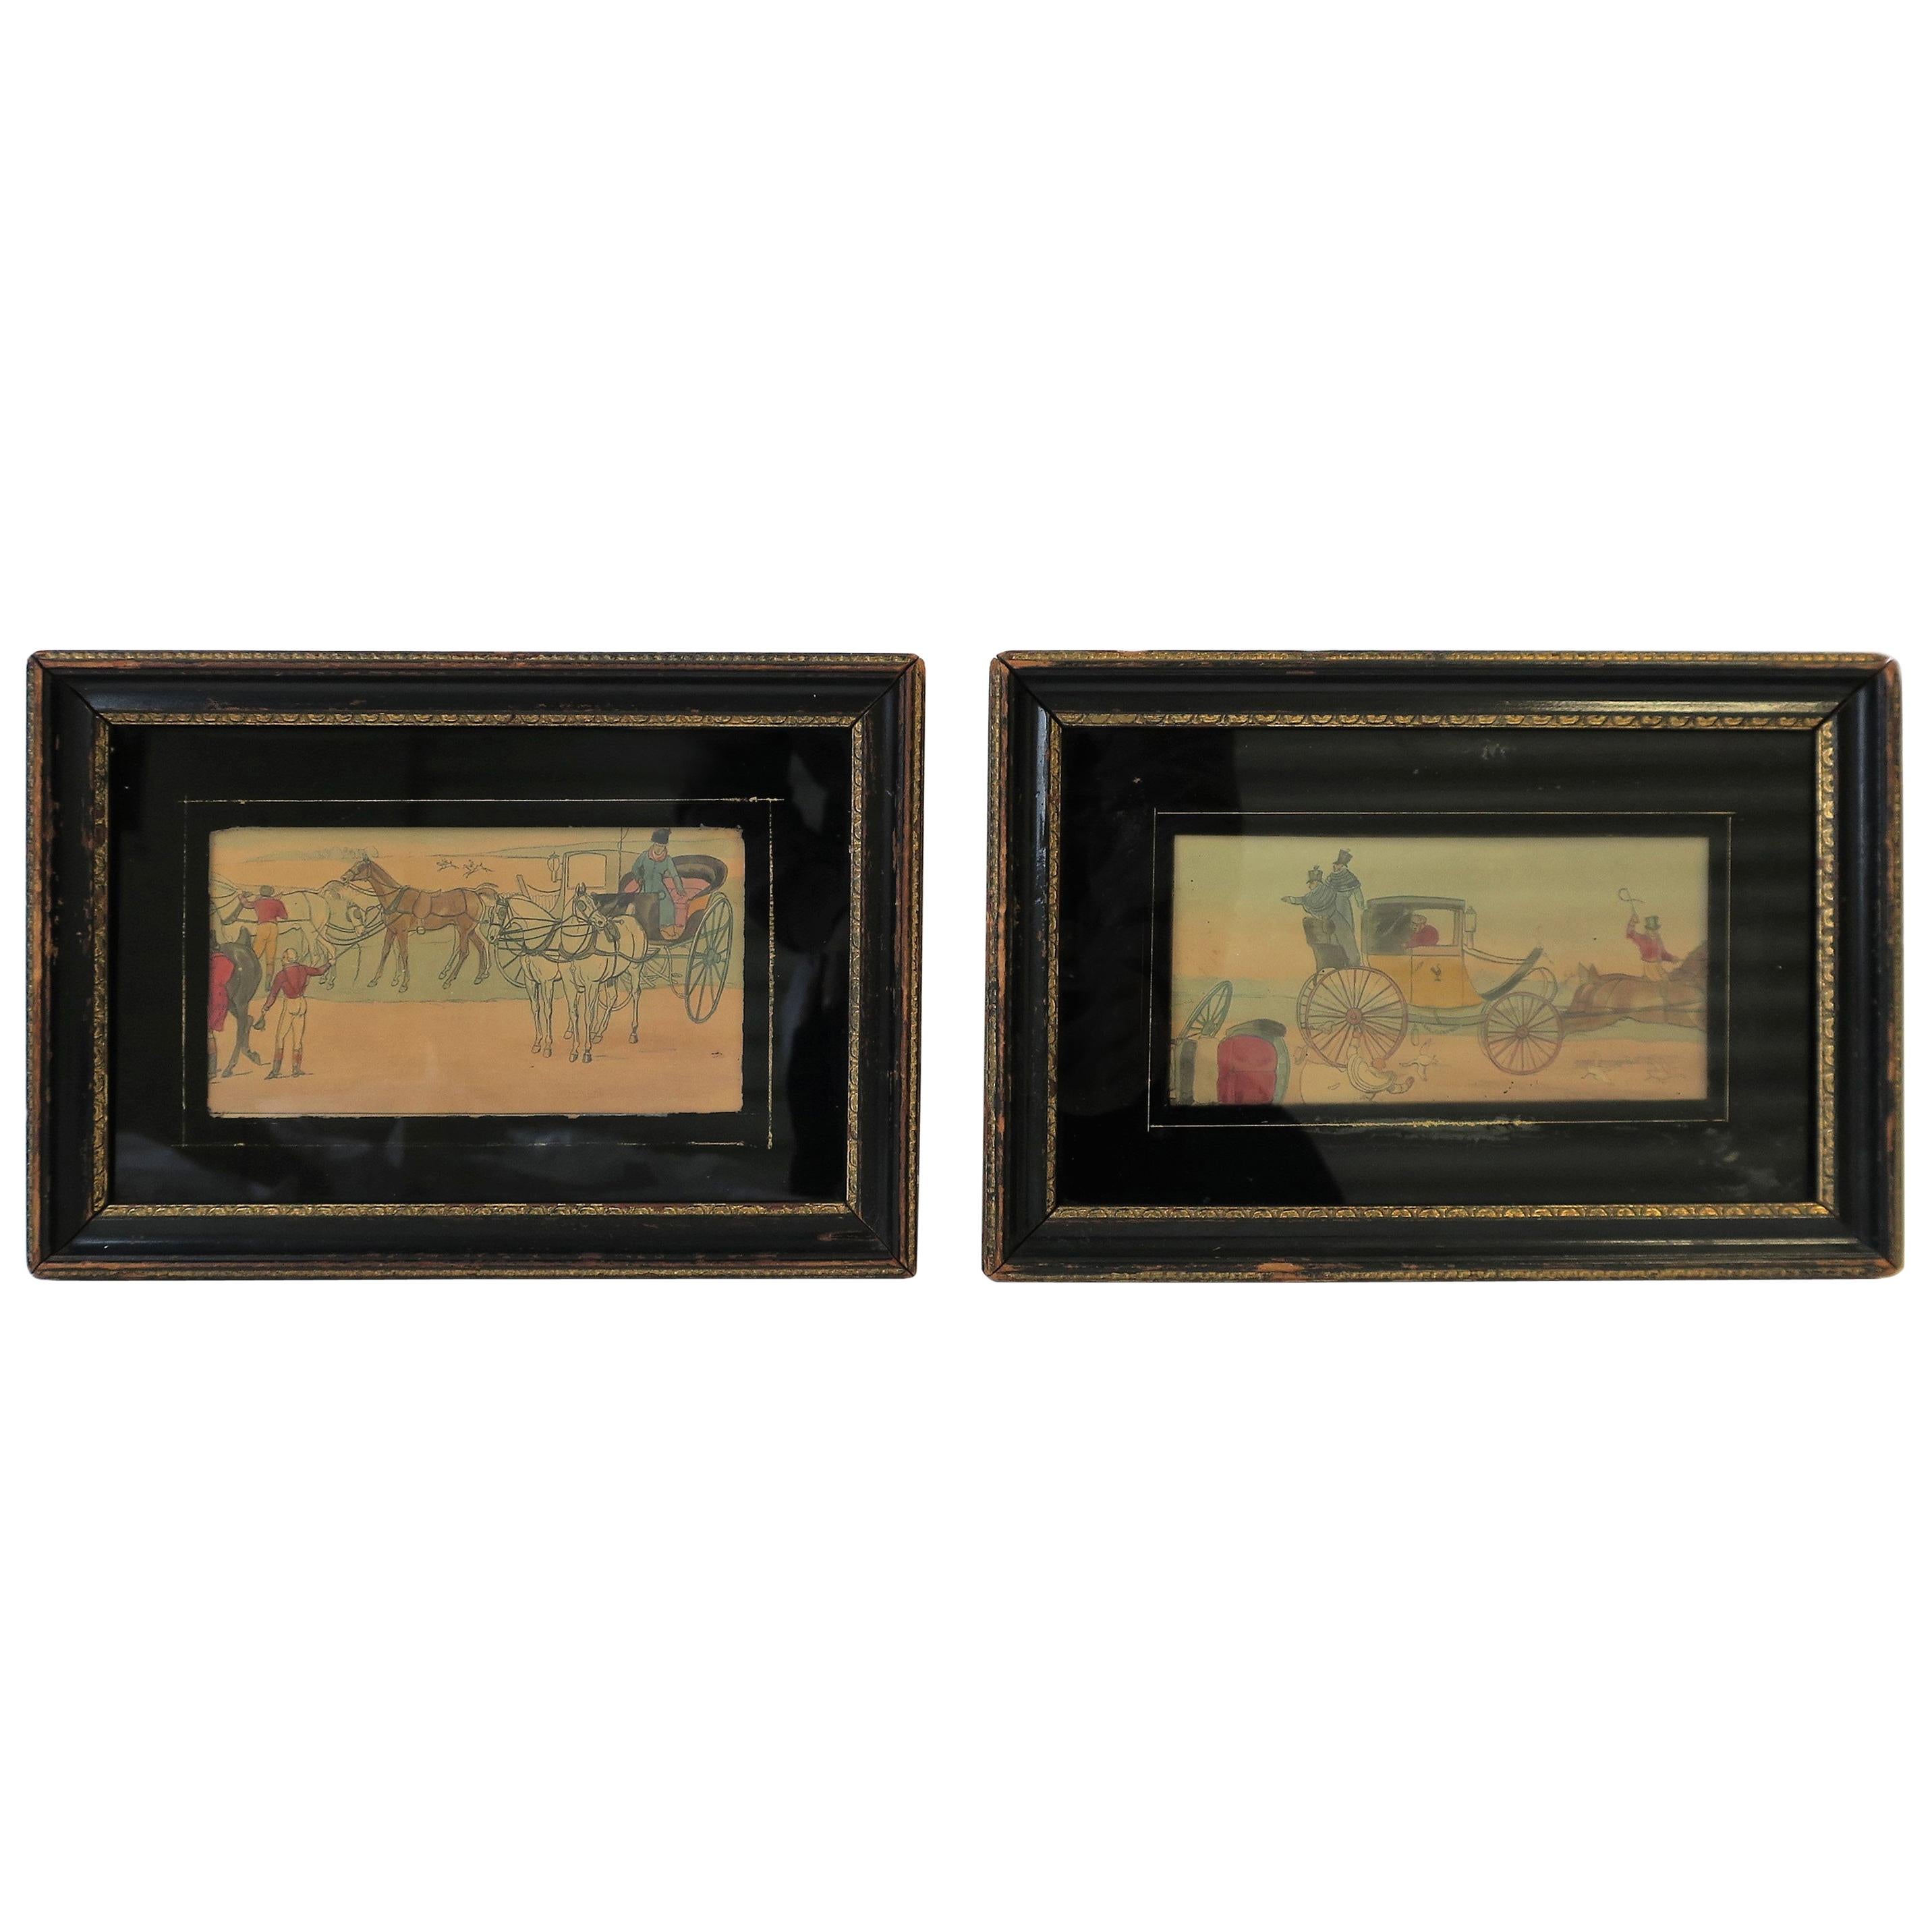 Antique Black and Gold Frames with Artwork